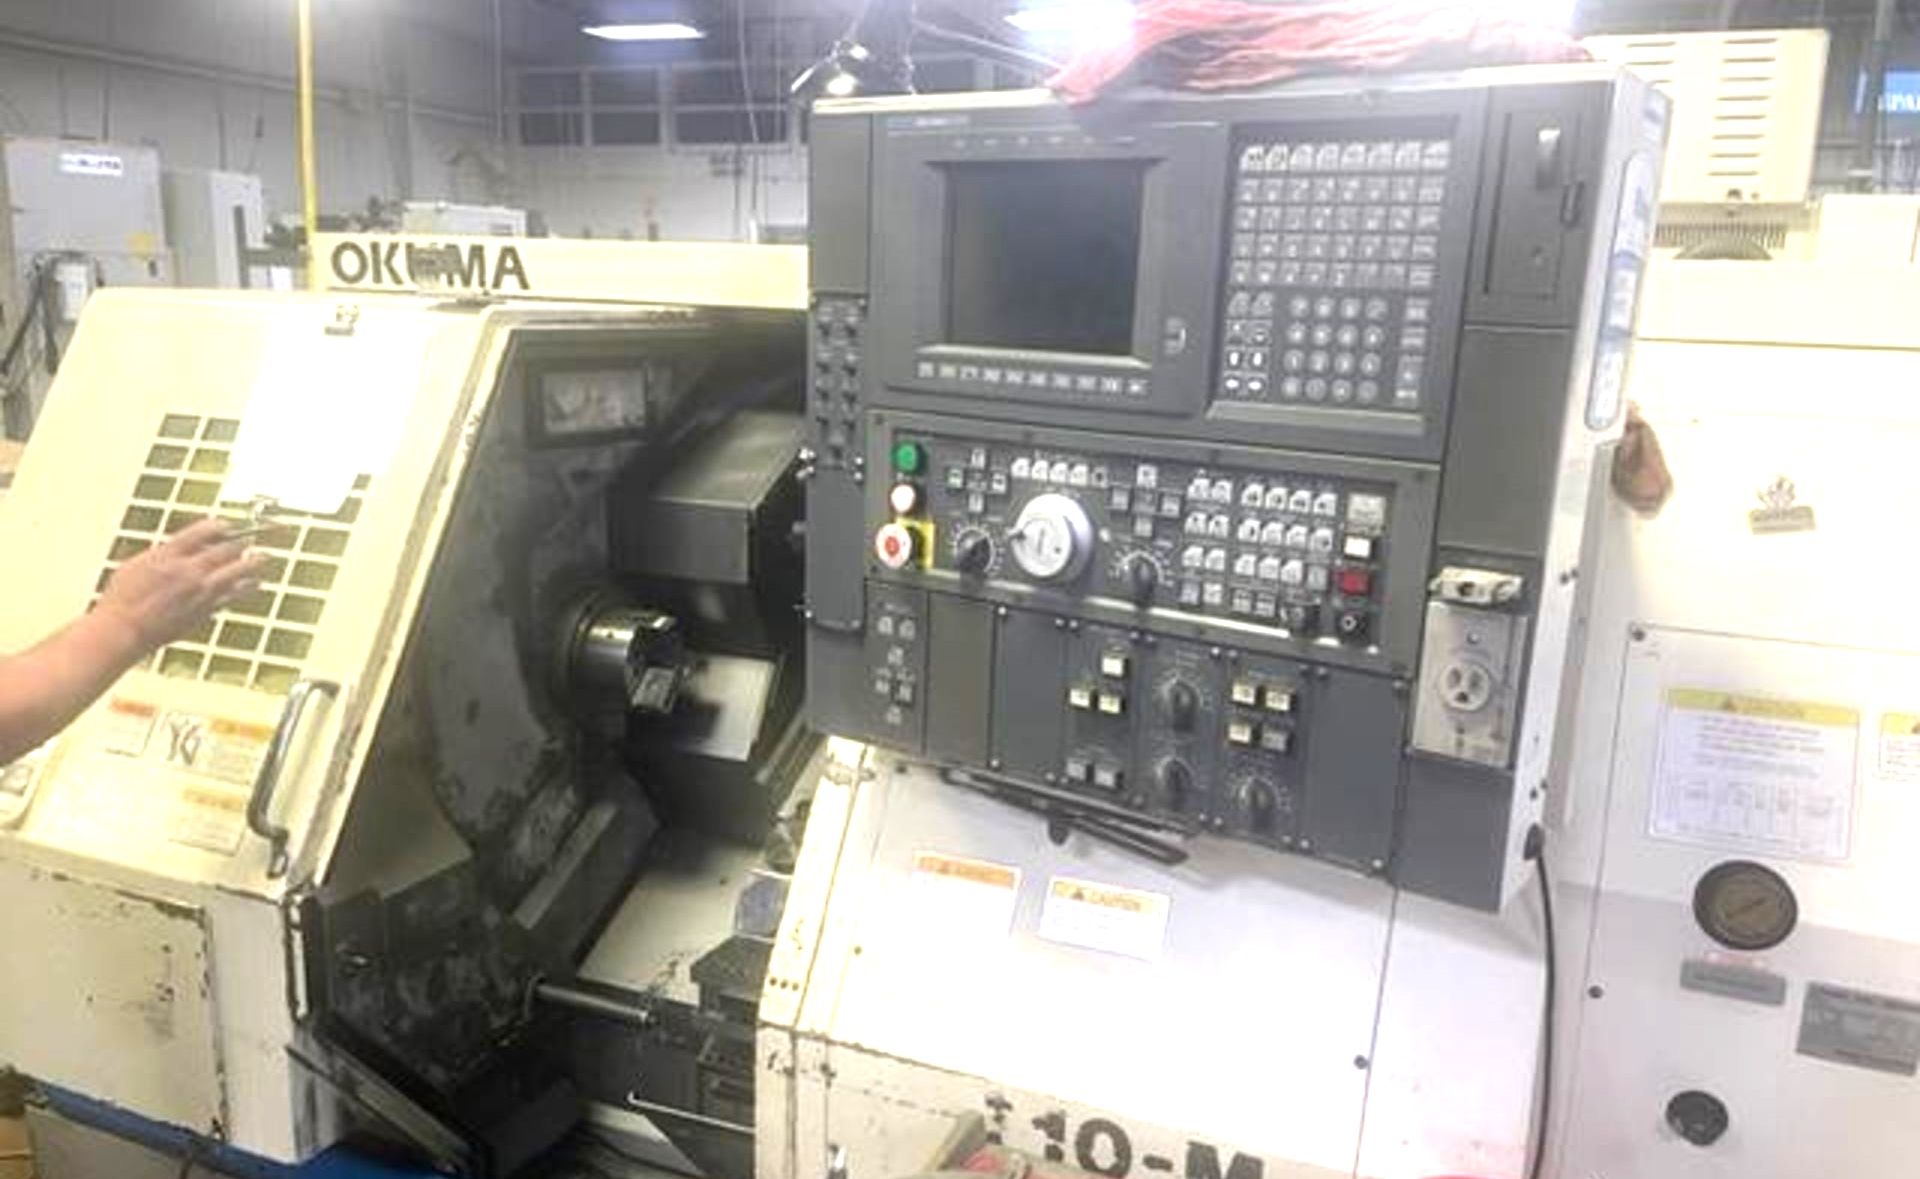 OKUMA LT-10MW 7-AXIS CNC TURNING CENTER LATHE, TWIN TURRET, SPINDLE & C-AXIS, LIVE TOOLING, - Image 2 of 14